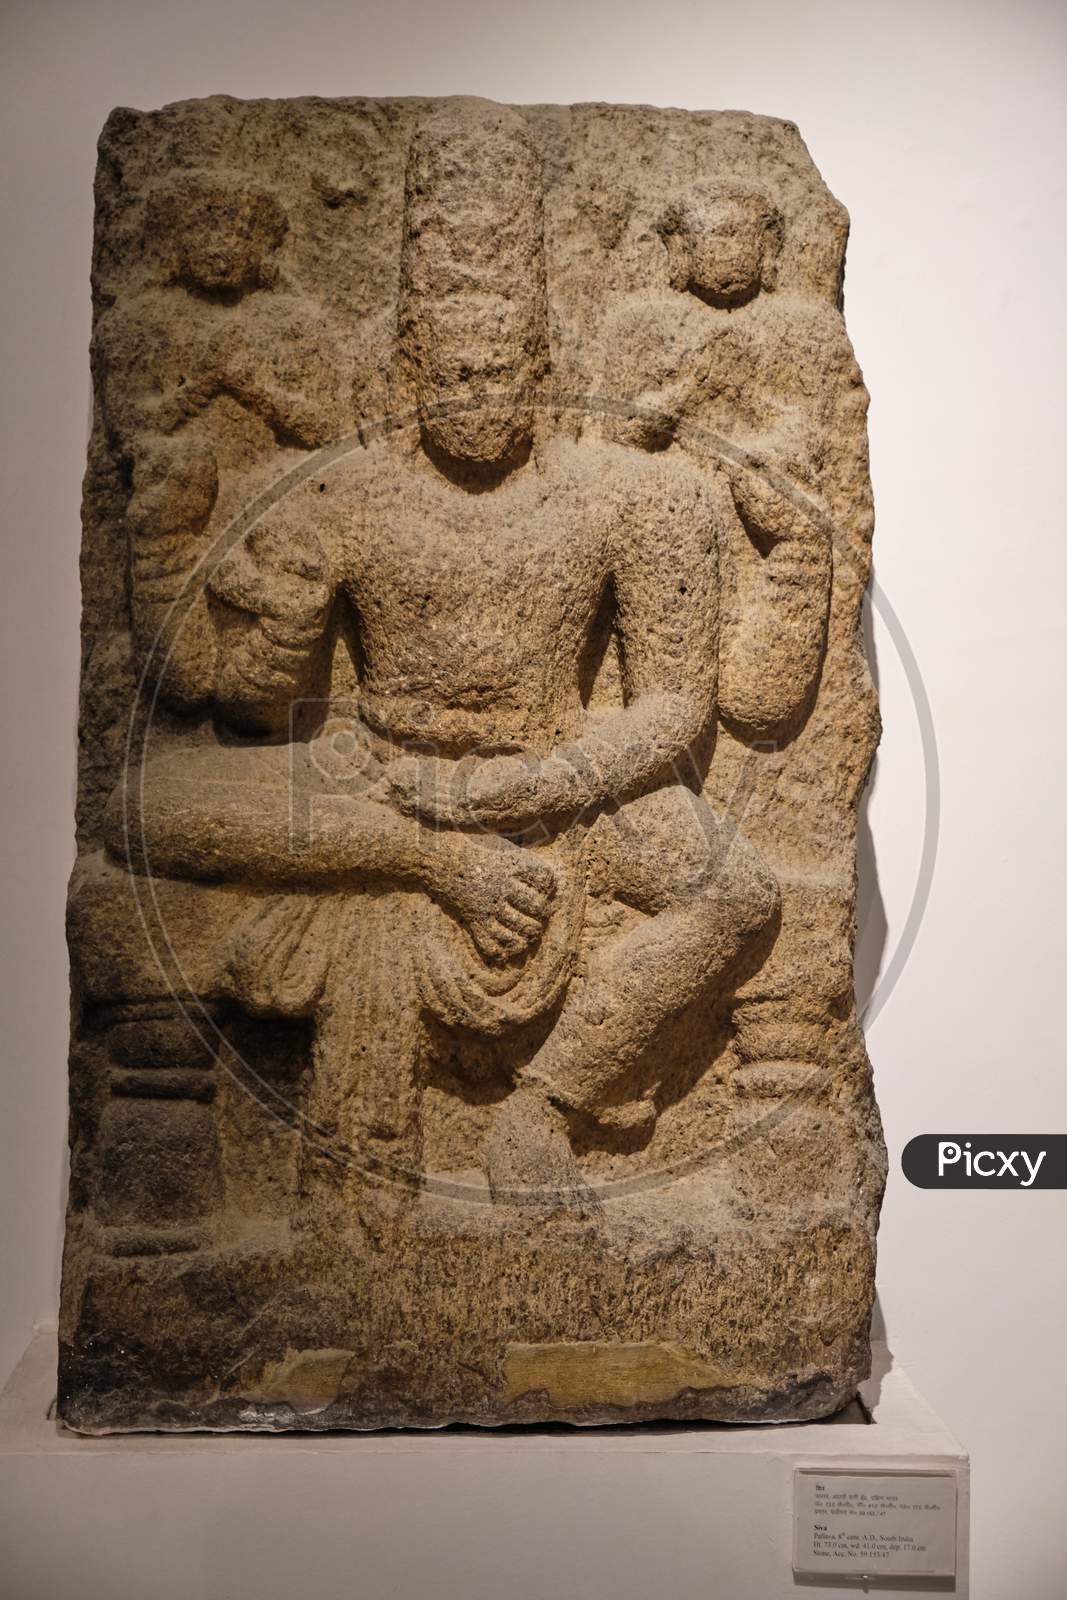 Stone Relief Of Hindu God Shiva In The National Museum Of India In New Delhi